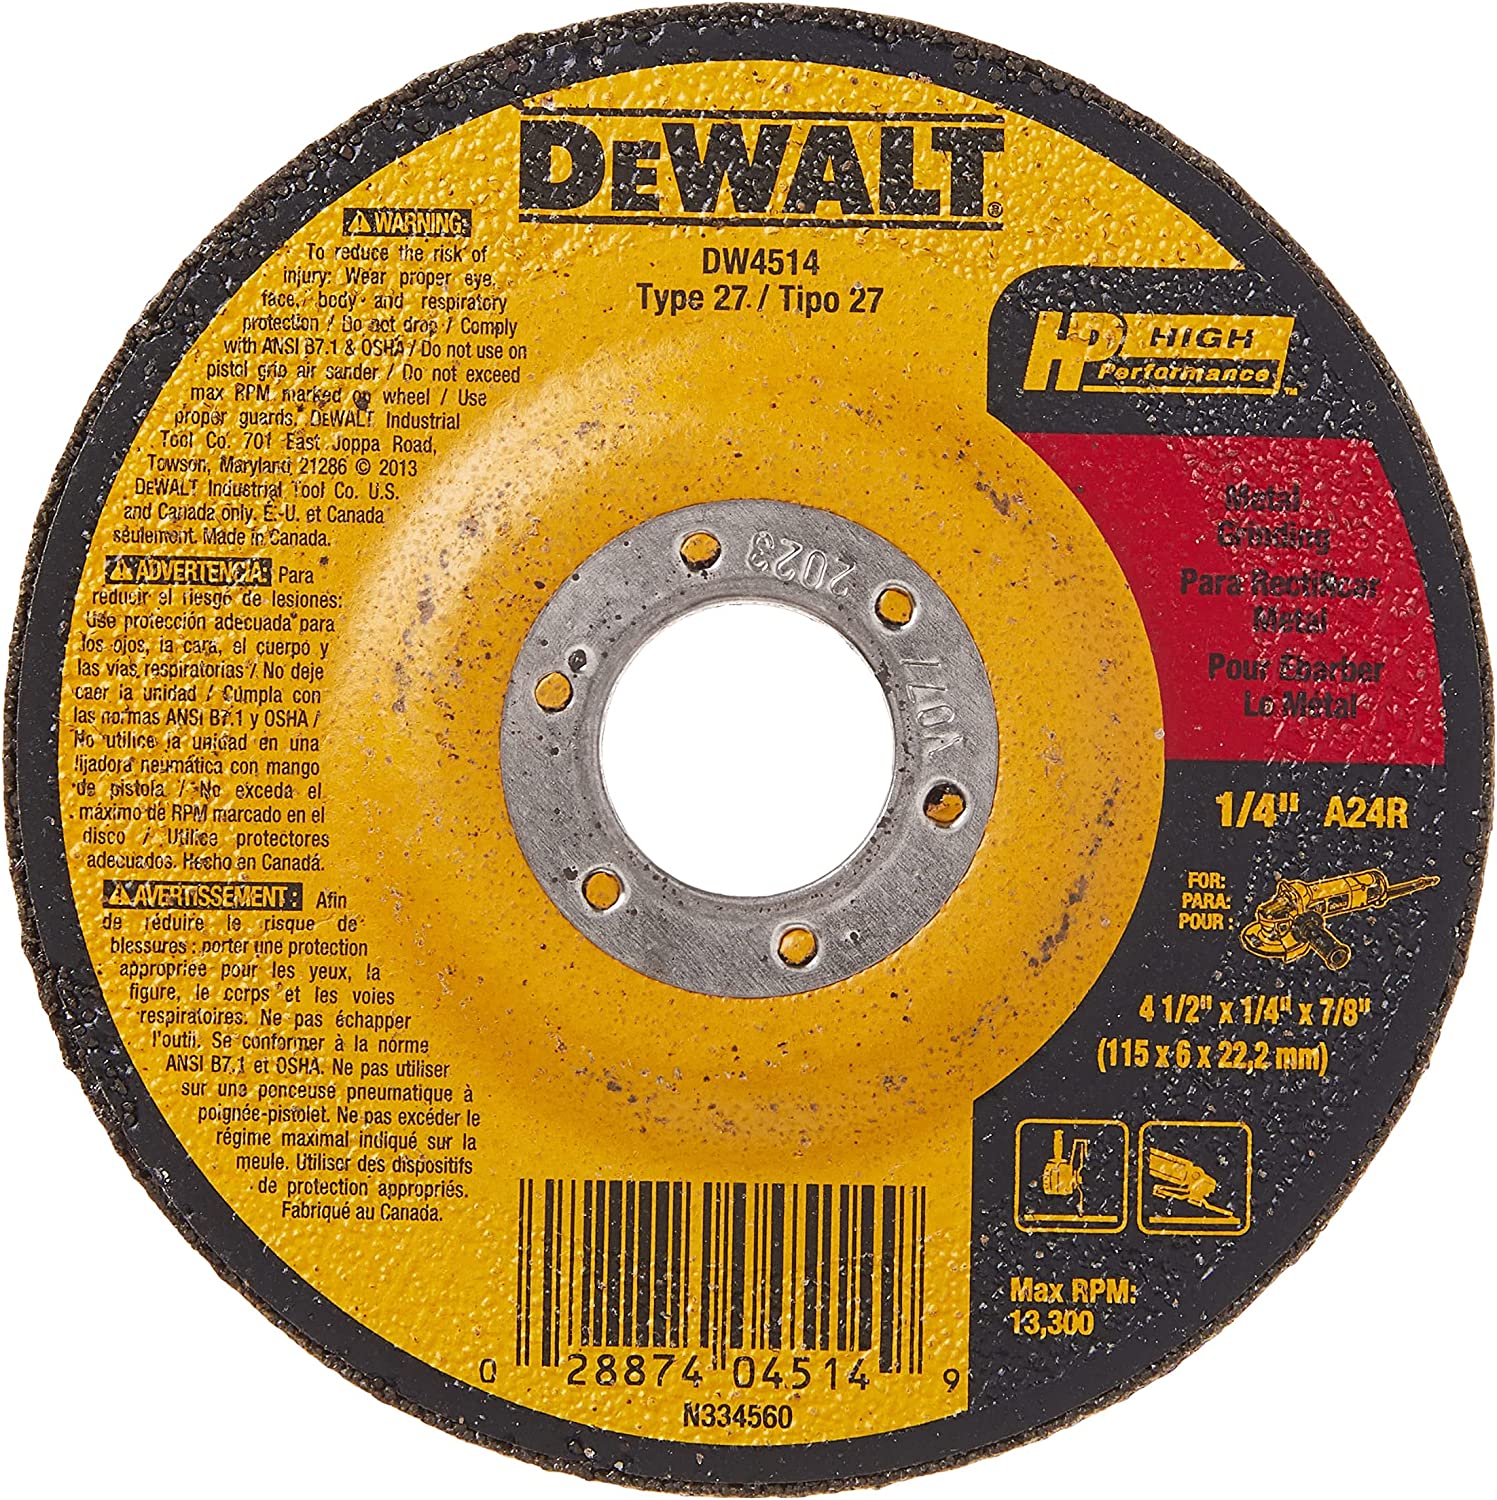 DEWALT DW4514 1/4" Thick Grinding Wheel with 4-1/2" Diameter and 7/8" Arbor $1.83